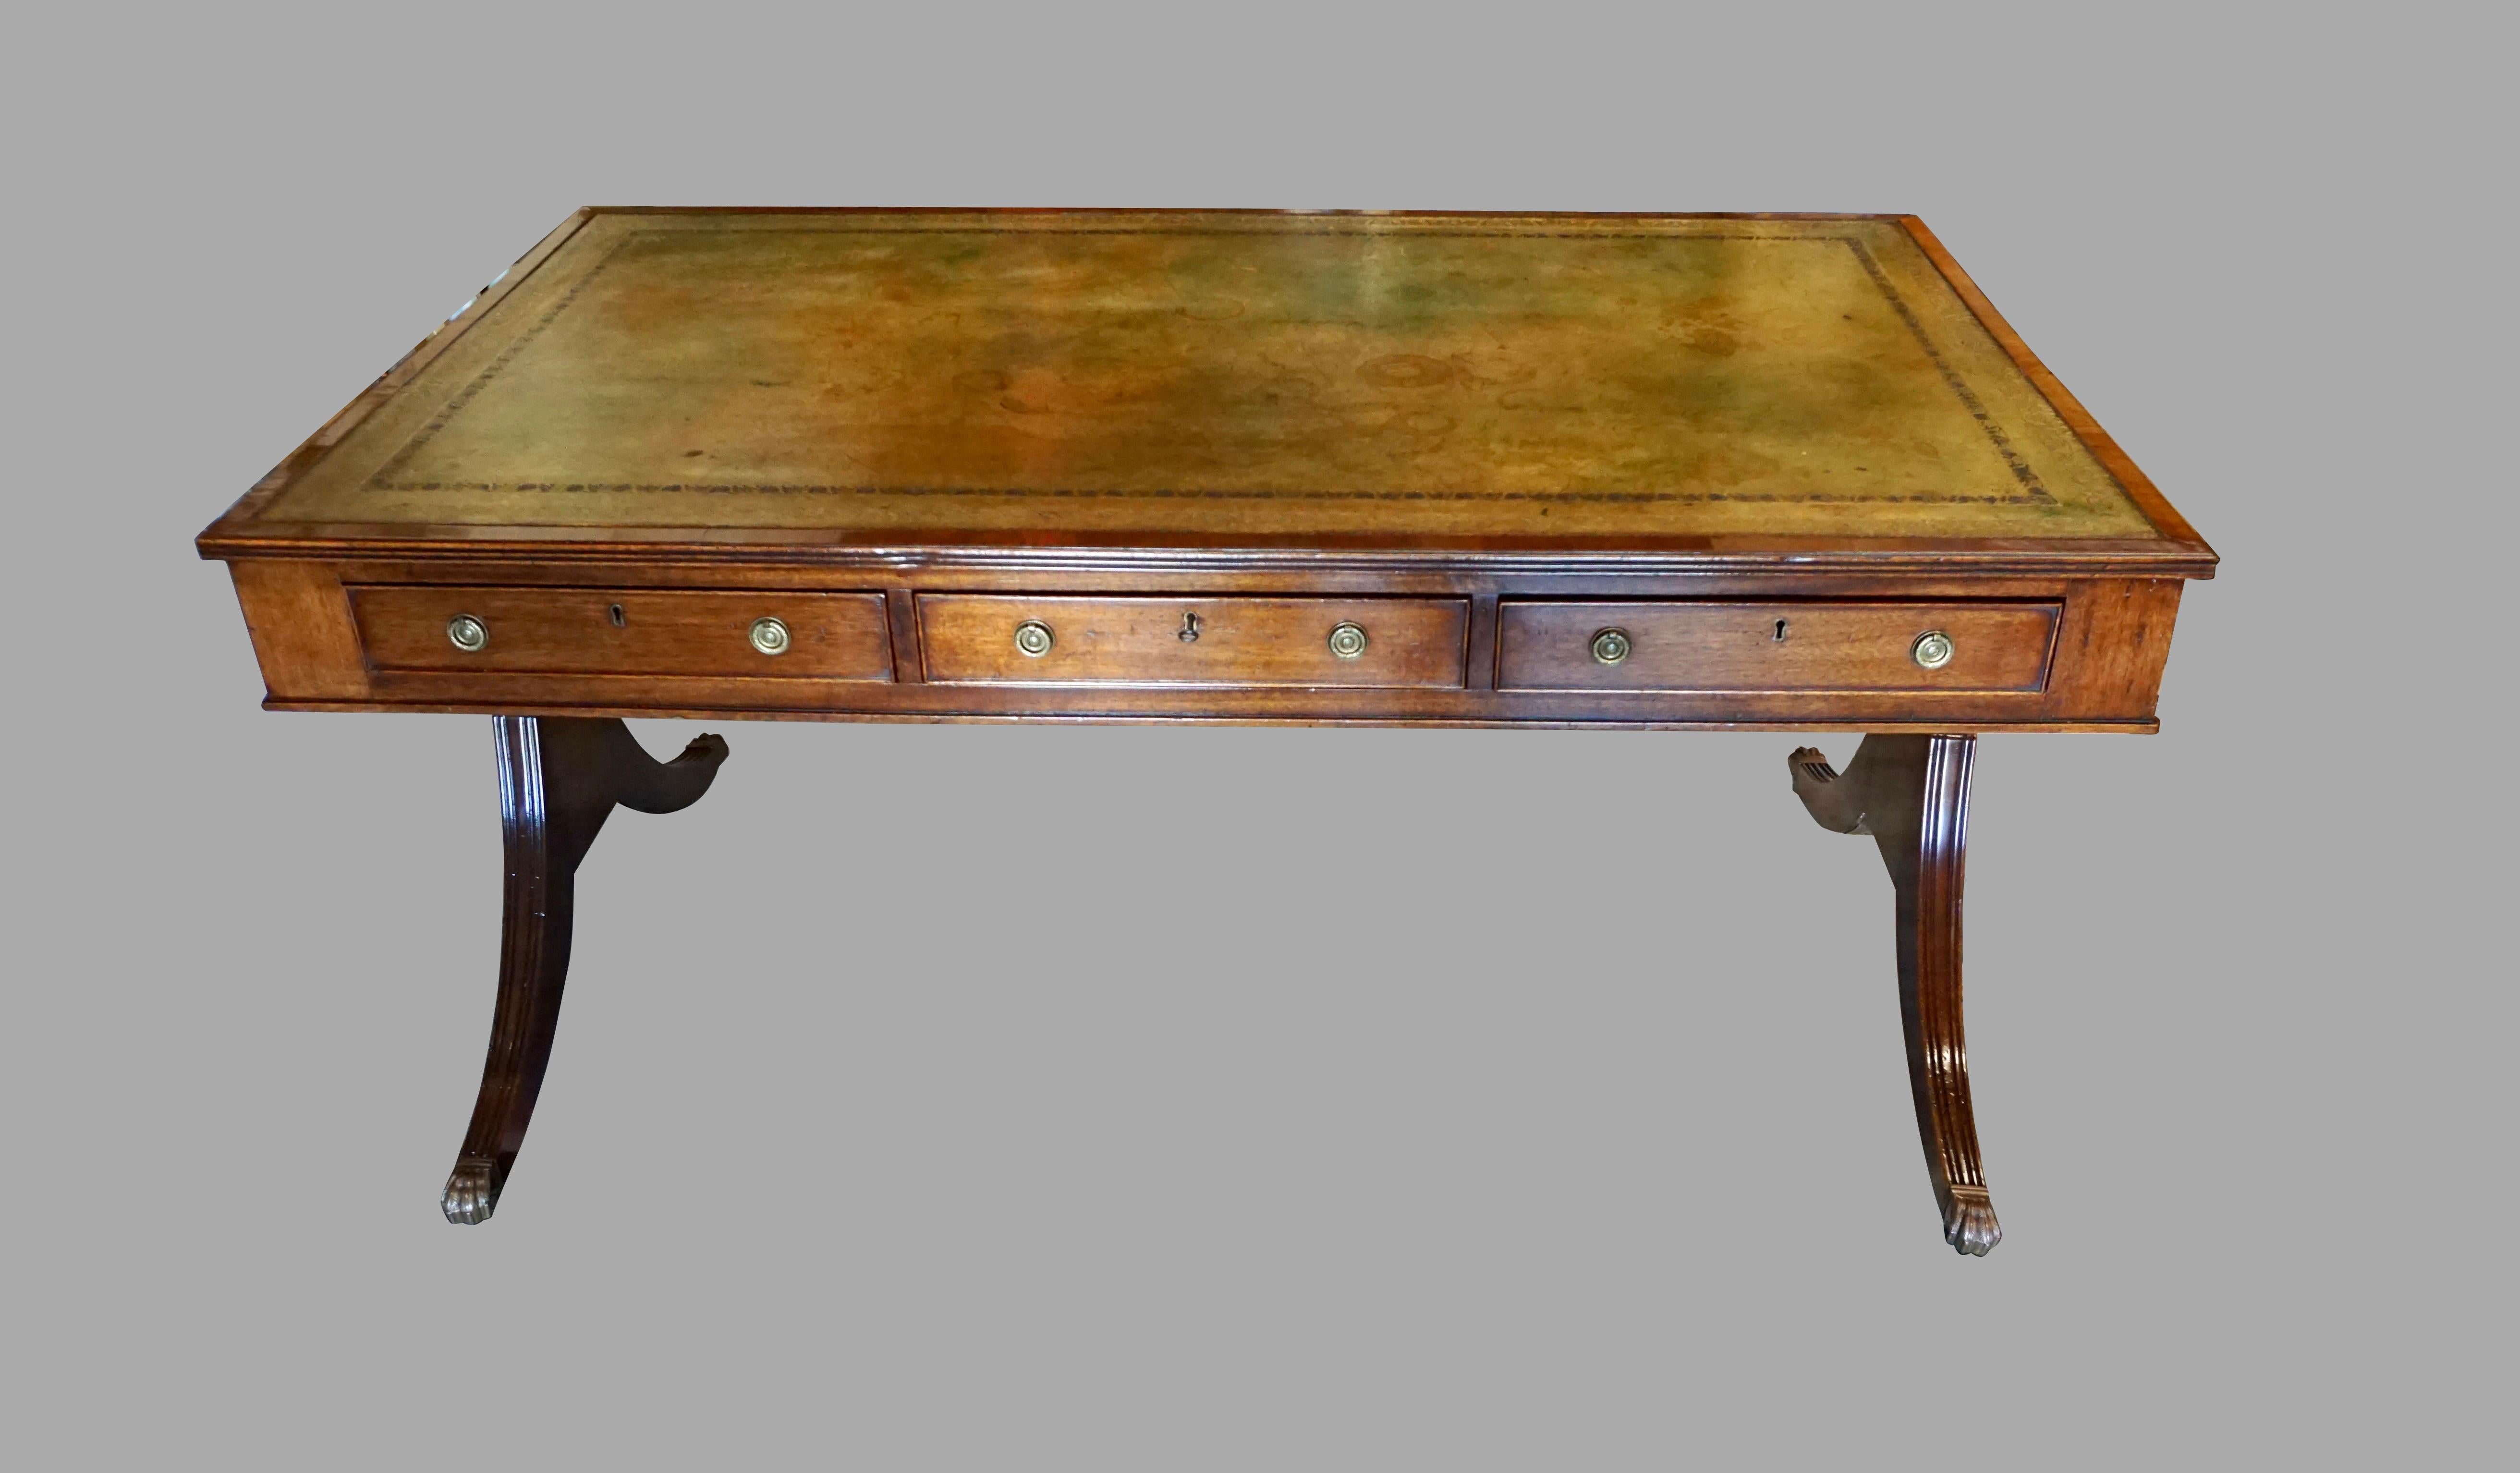 A handsome English Regency style mahogany writing table with a gilt-tooled tobacco colored leather top. The front has 3 functioning drawers and the back has 3 matching dummy drawers. The piece is supported on reeded downswept legs joined by a high